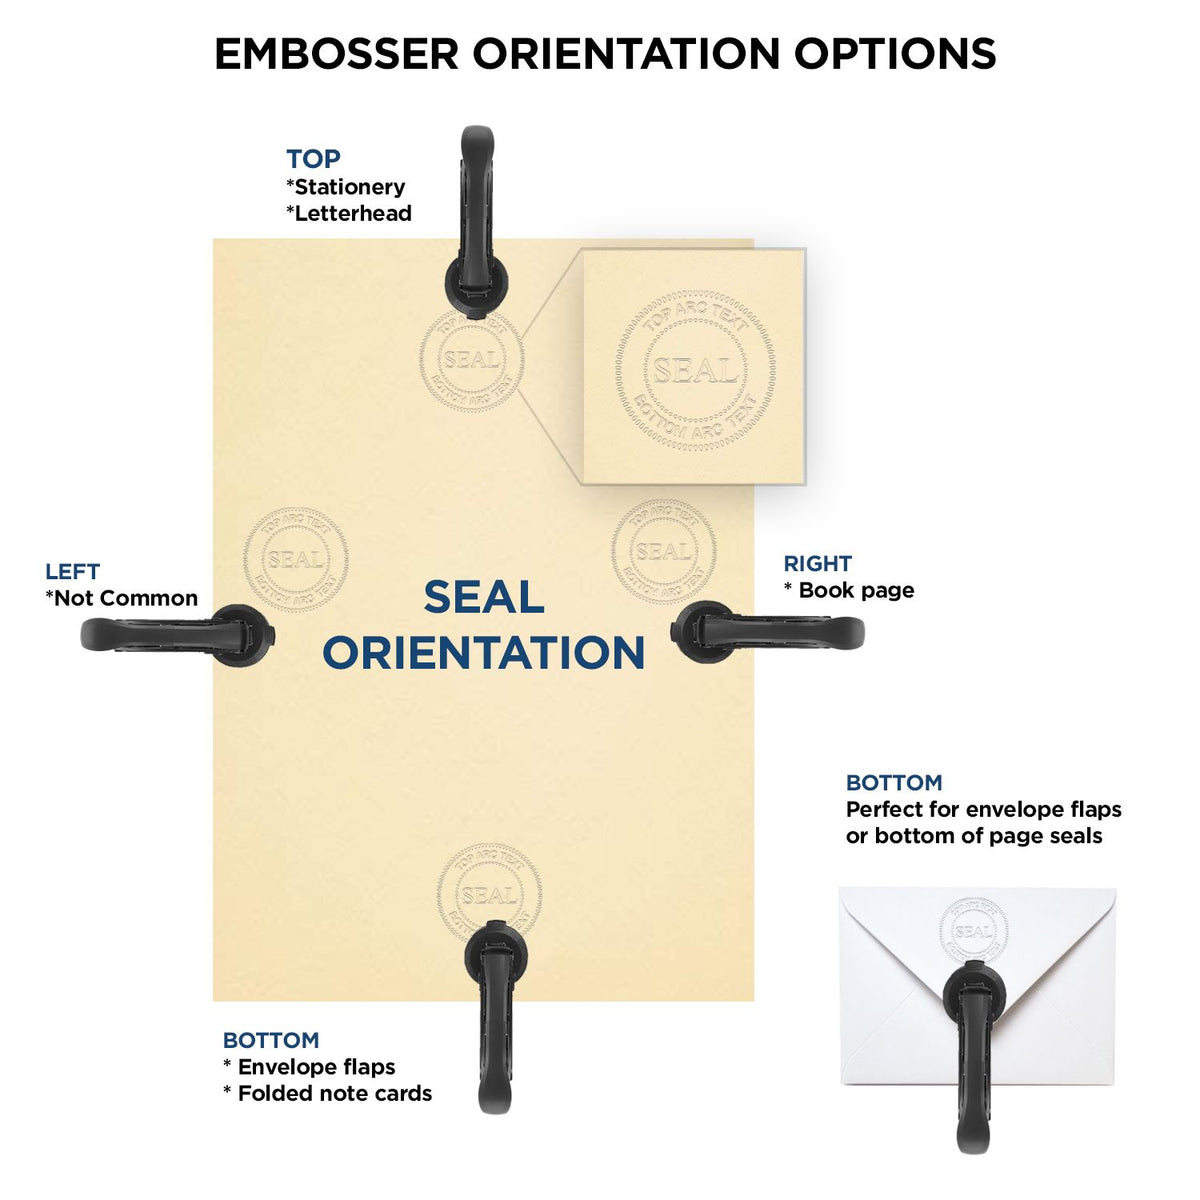 An infographic for the Handheld Louisiana Professional Engineer Embosser showing embosser orientation, this is showing examples of a top, bottom, right and left insert.